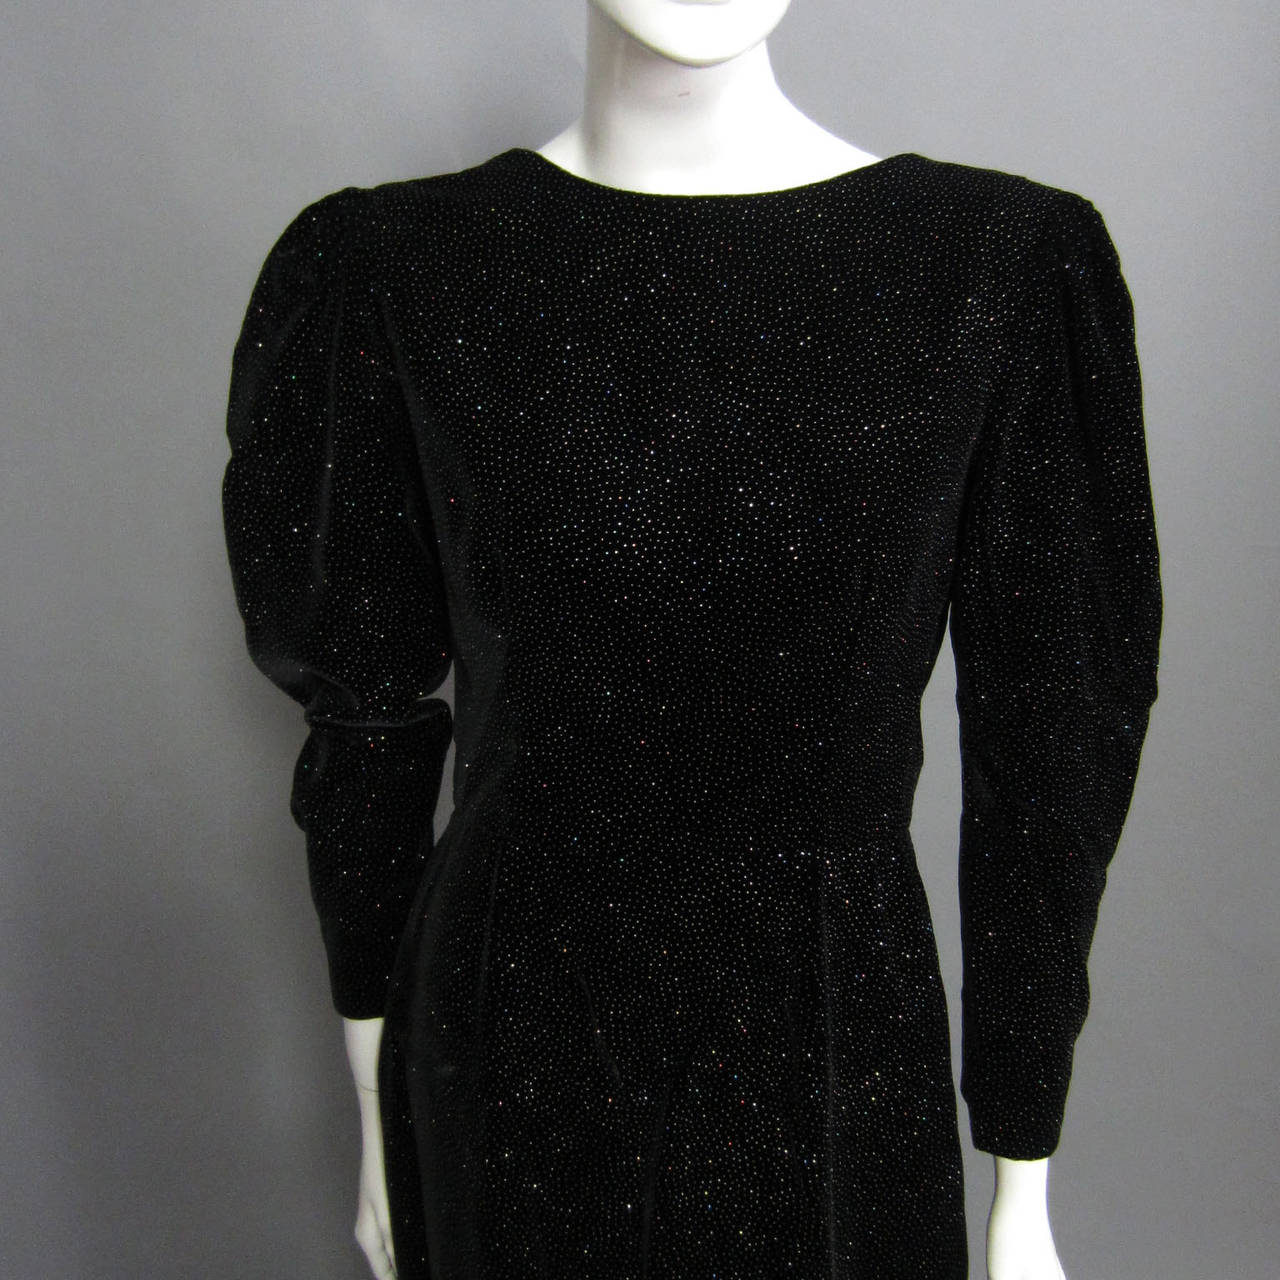 The fabric of this LANVIN gown is exquisite. The black velvet is covered with silver glitter inlayed in the fabric. The fabric resembles the look of a clear, starry night sky; the sparkles reflect and refract light. The puff sleeve detail accented